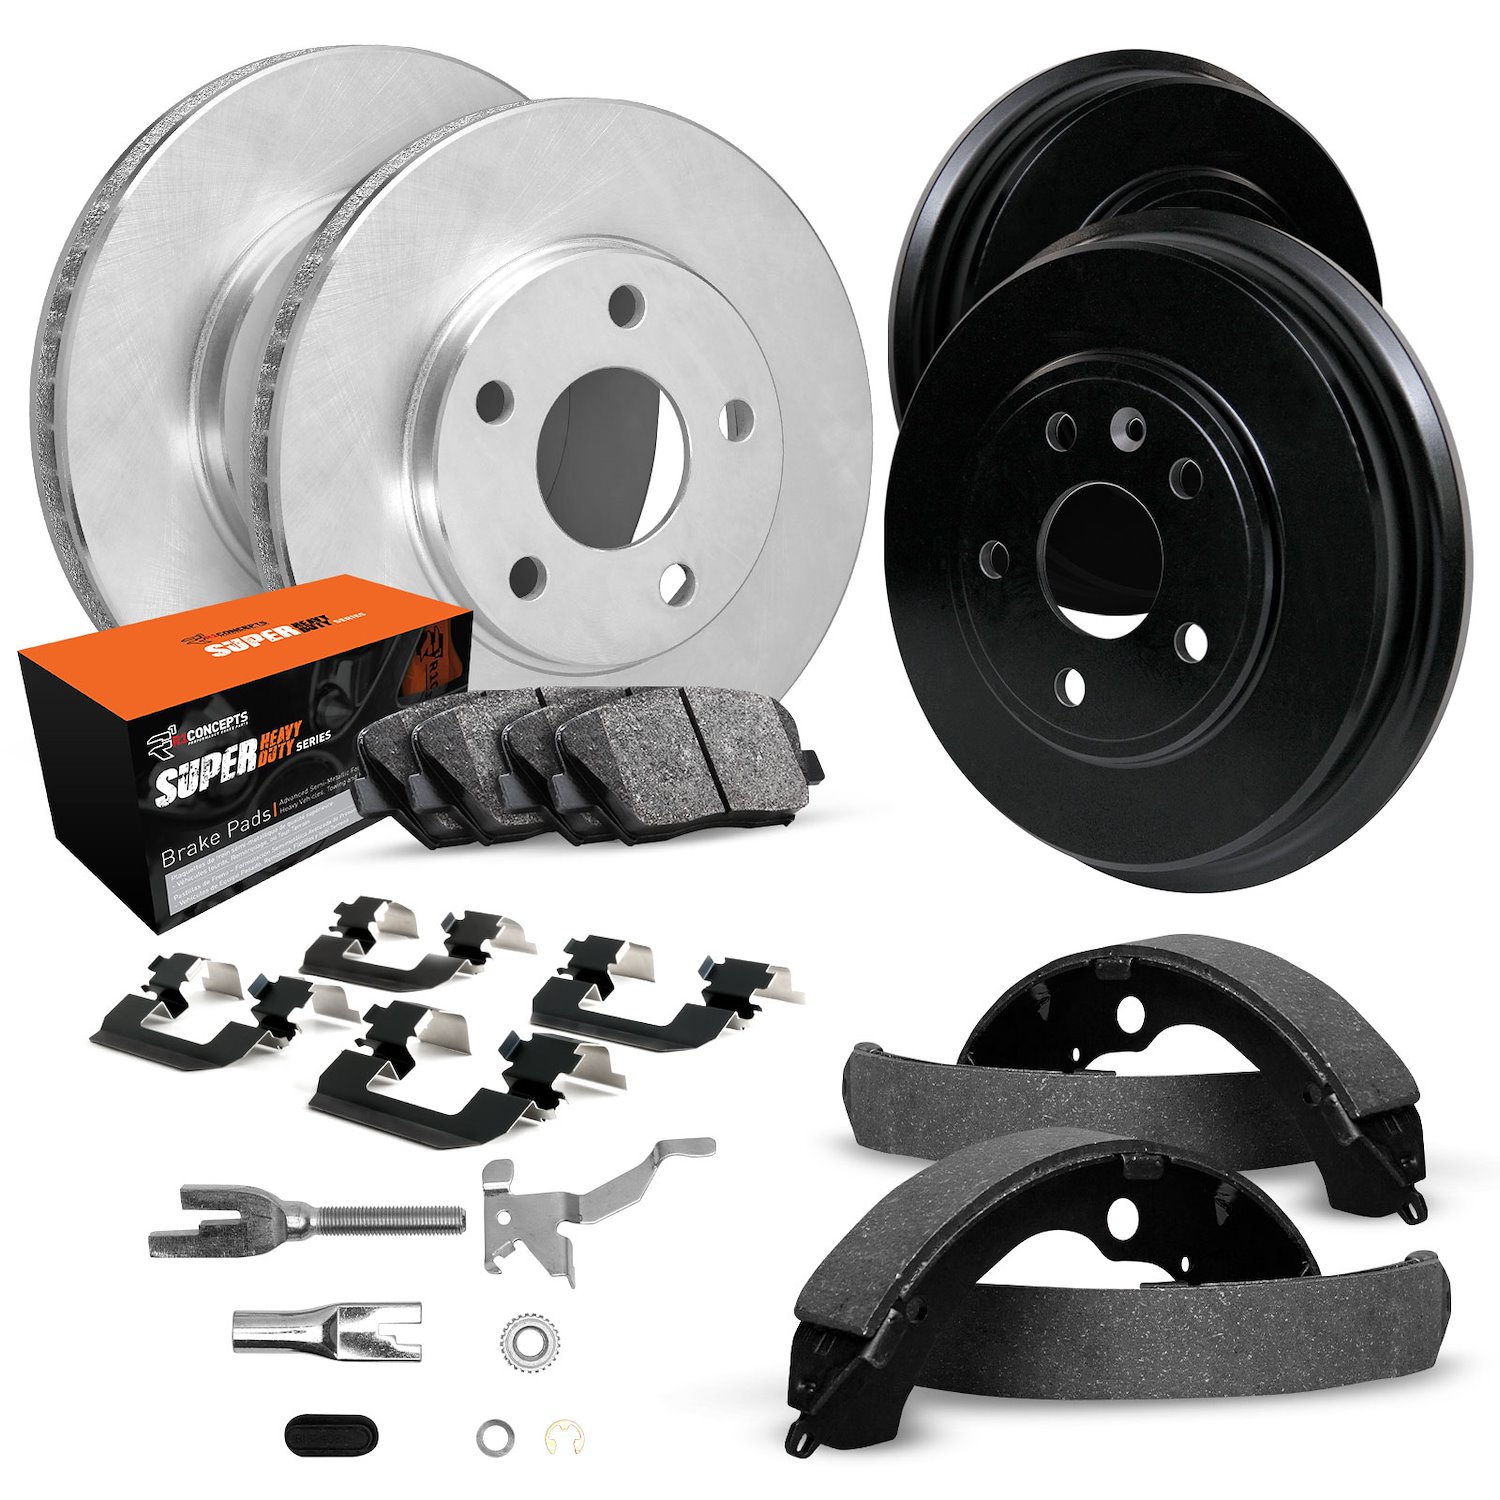 E-Line Blank Brake Rotor & Drum Set w/Super-Duty Pads, Shoes, Hardware, & Adjusters, 1997-1999 GM, Position: Front & Rear